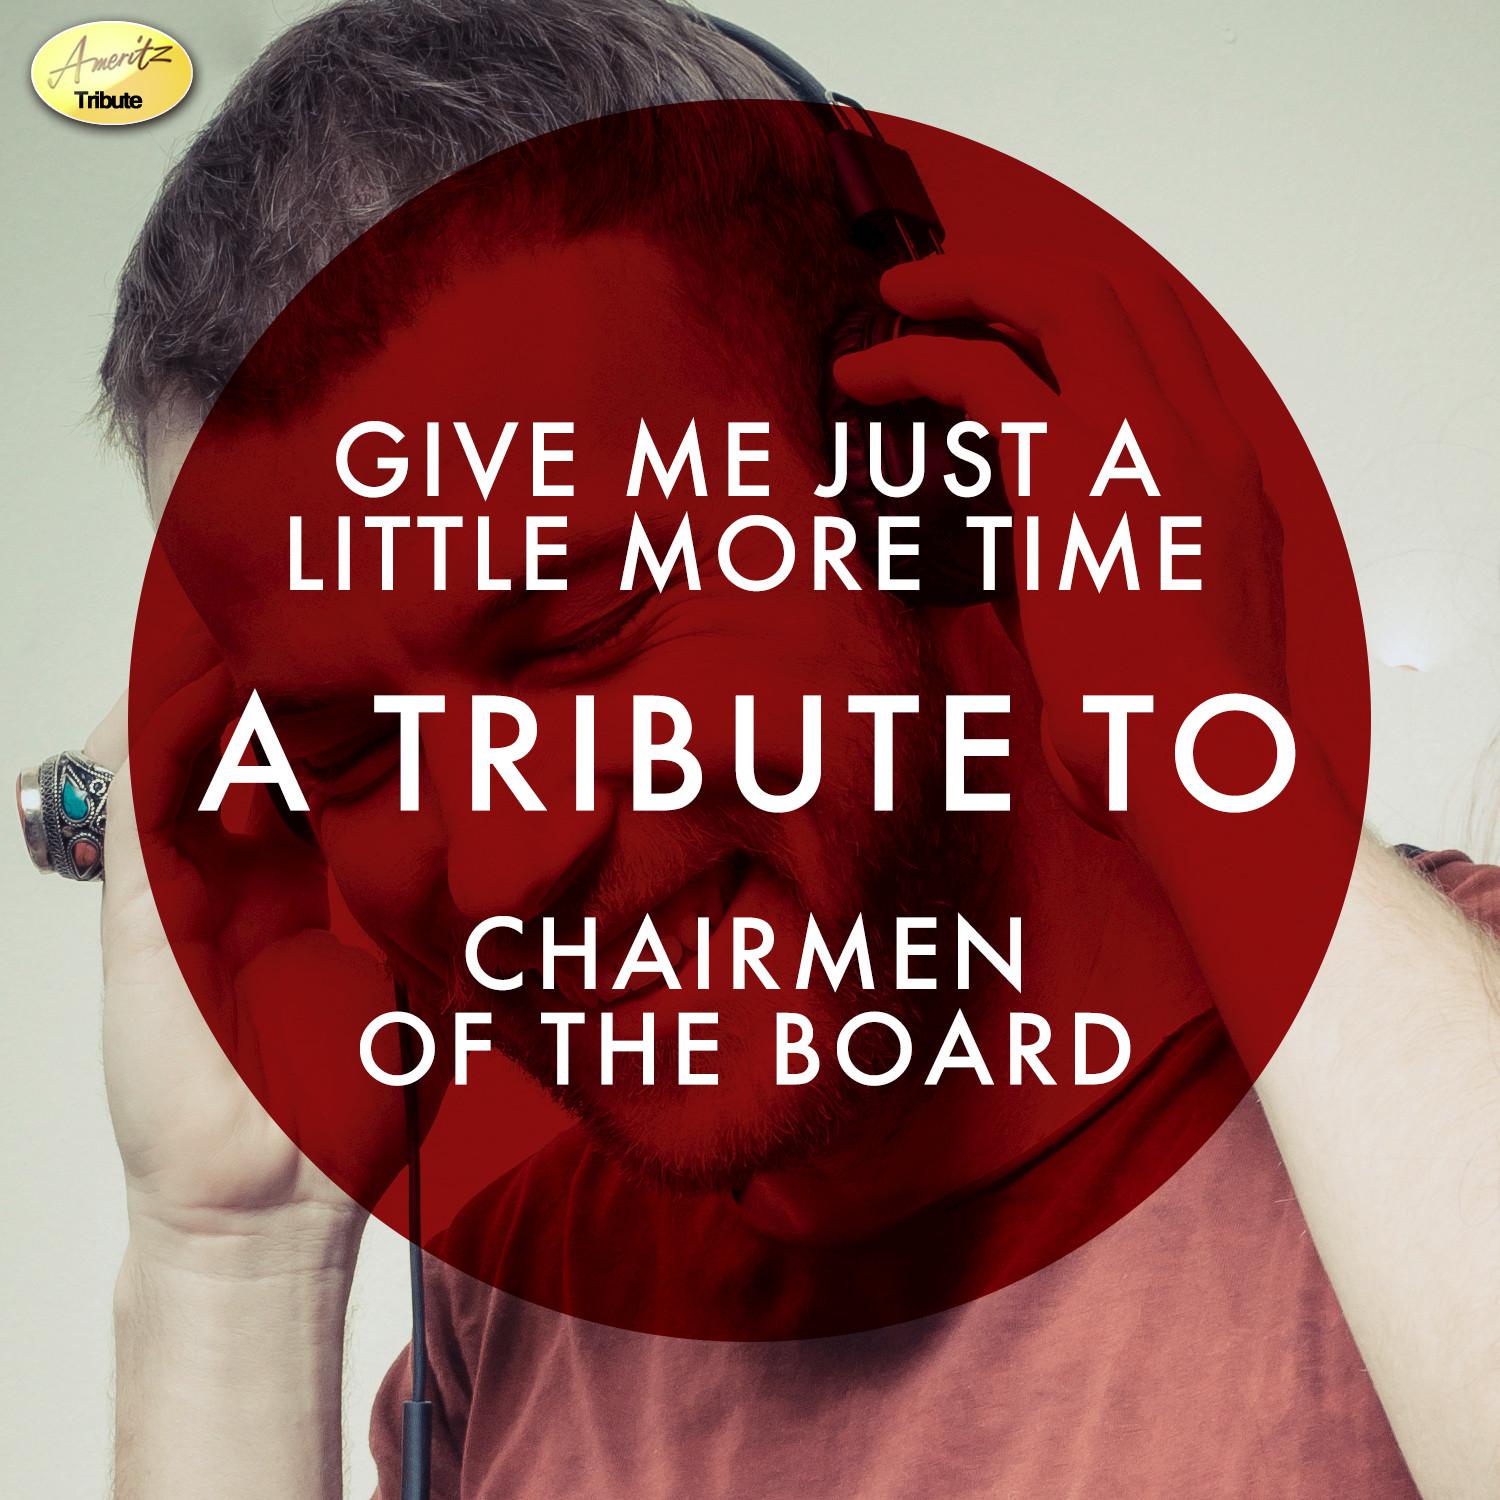 Give Me Just a Little More Time - A Tribute to Chairman of the Board